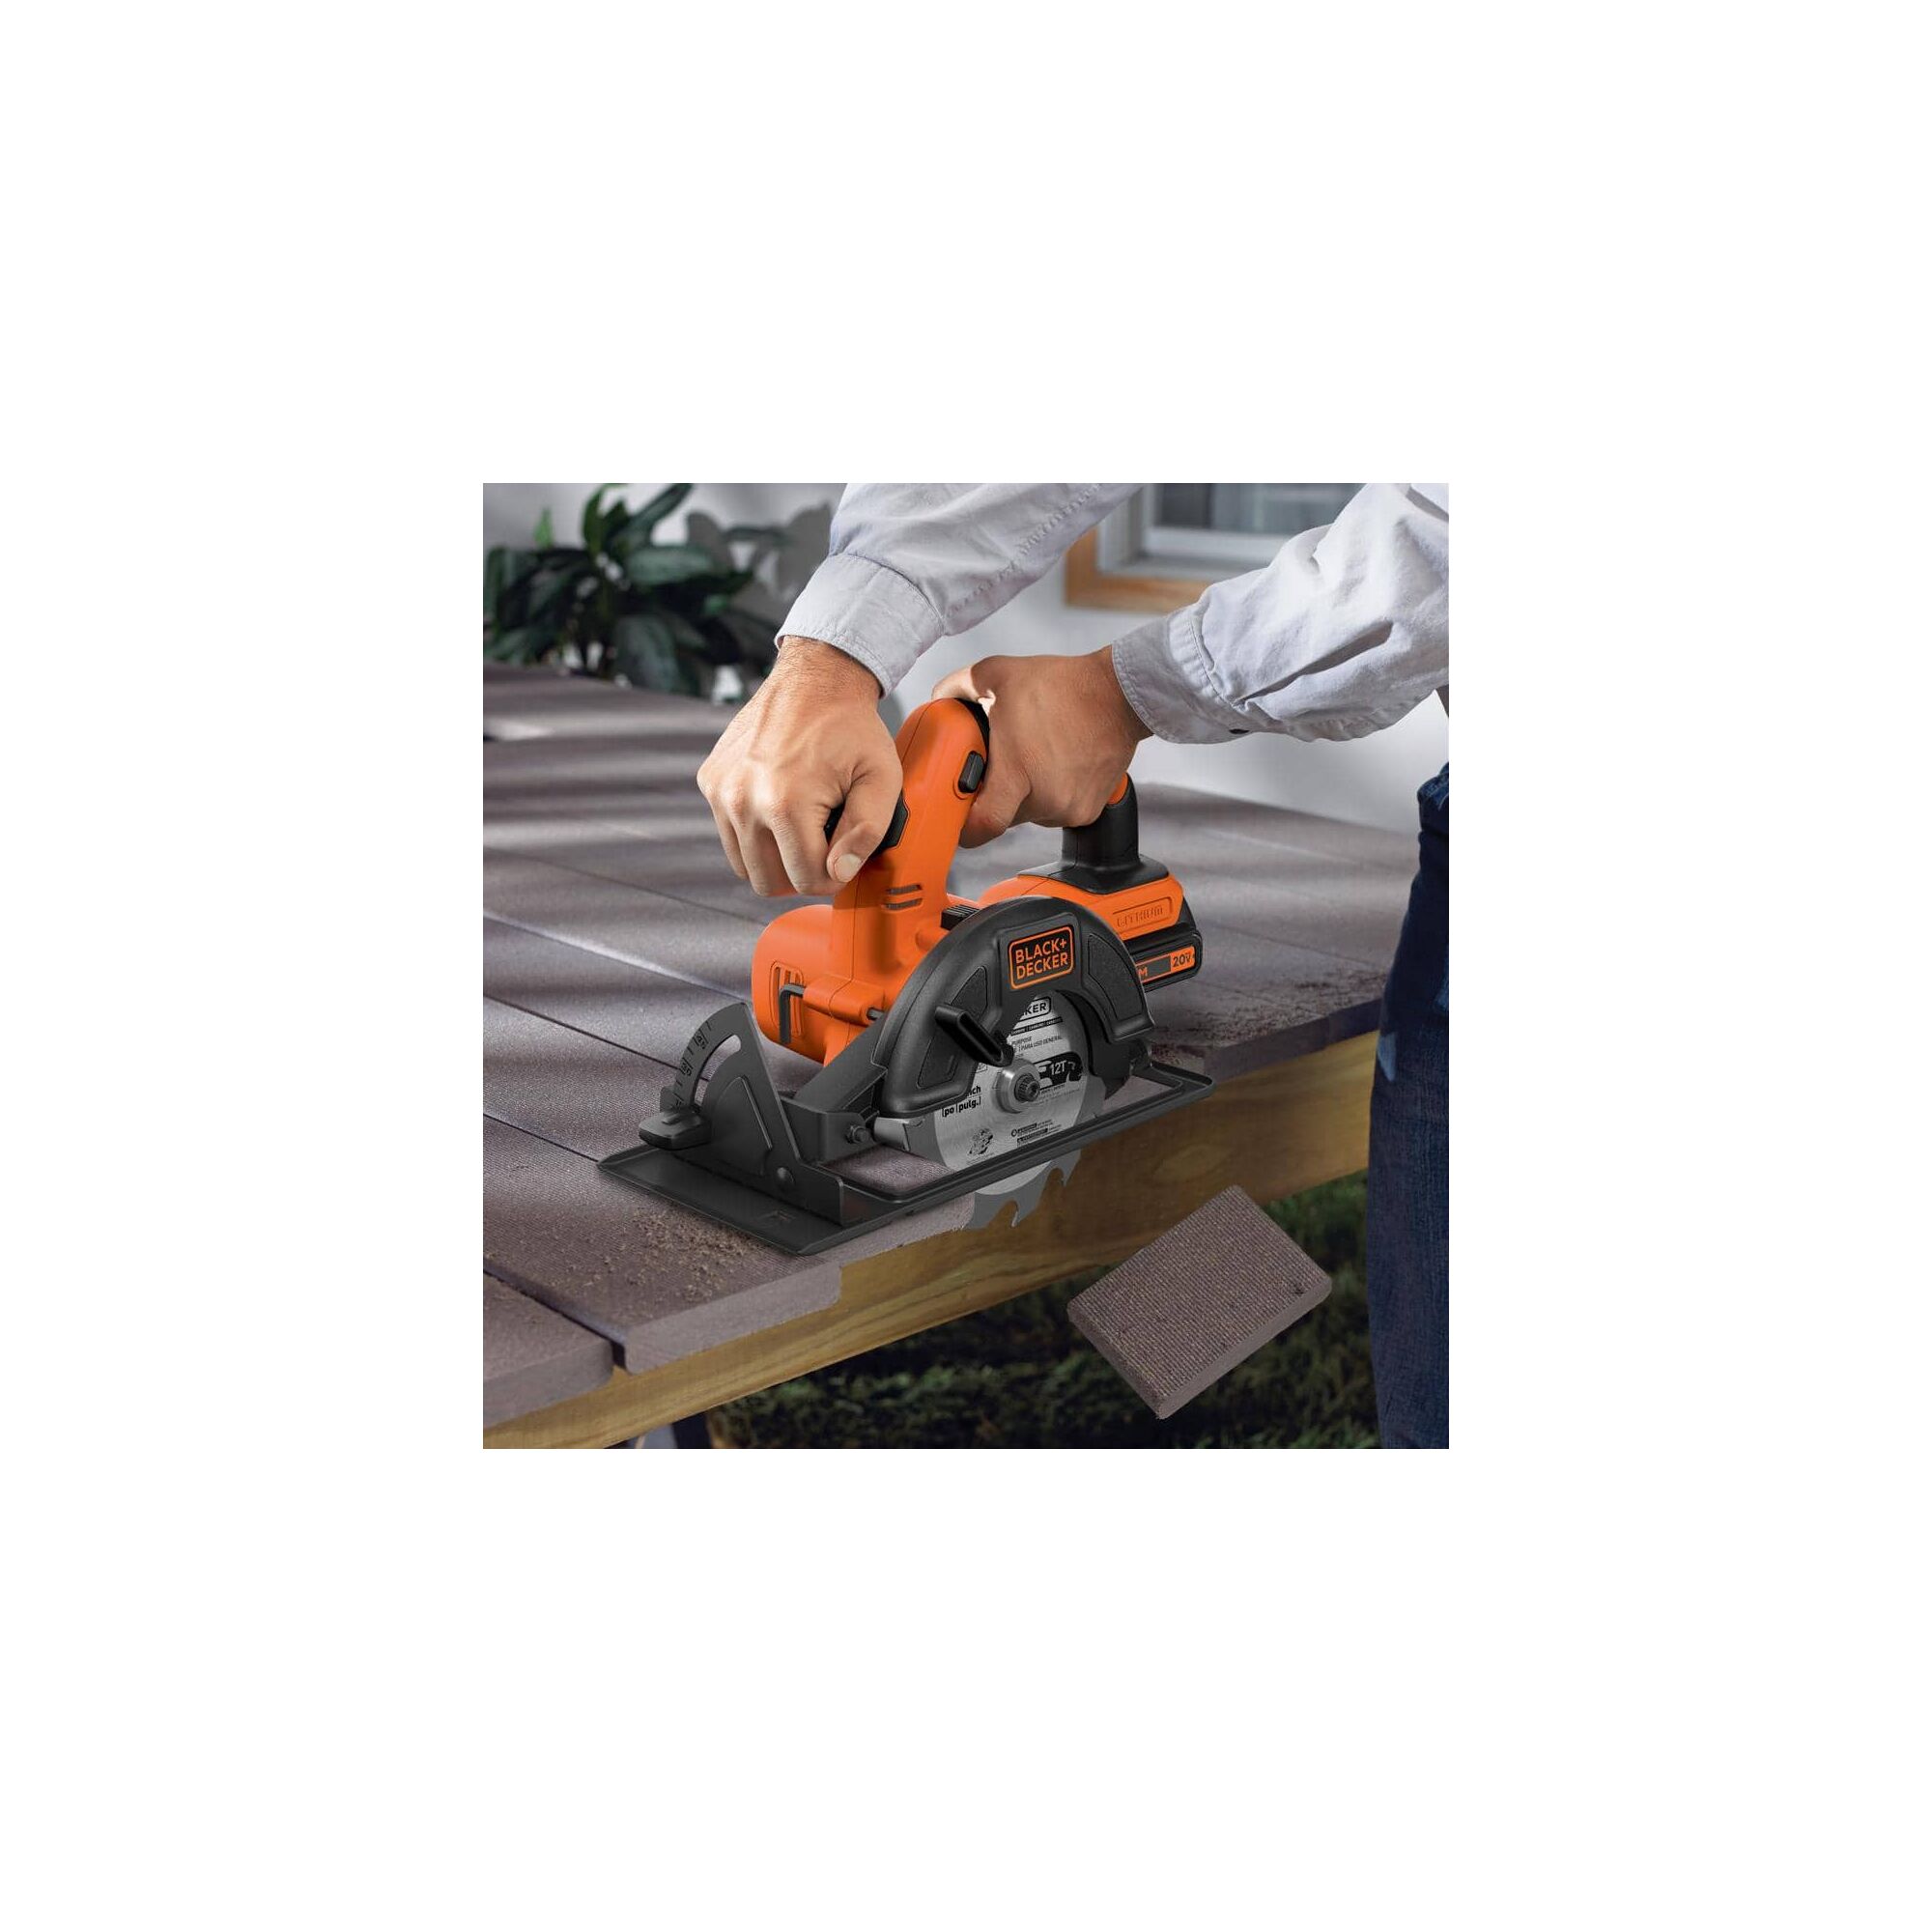 Cordless circular saw being used by person to cut wood